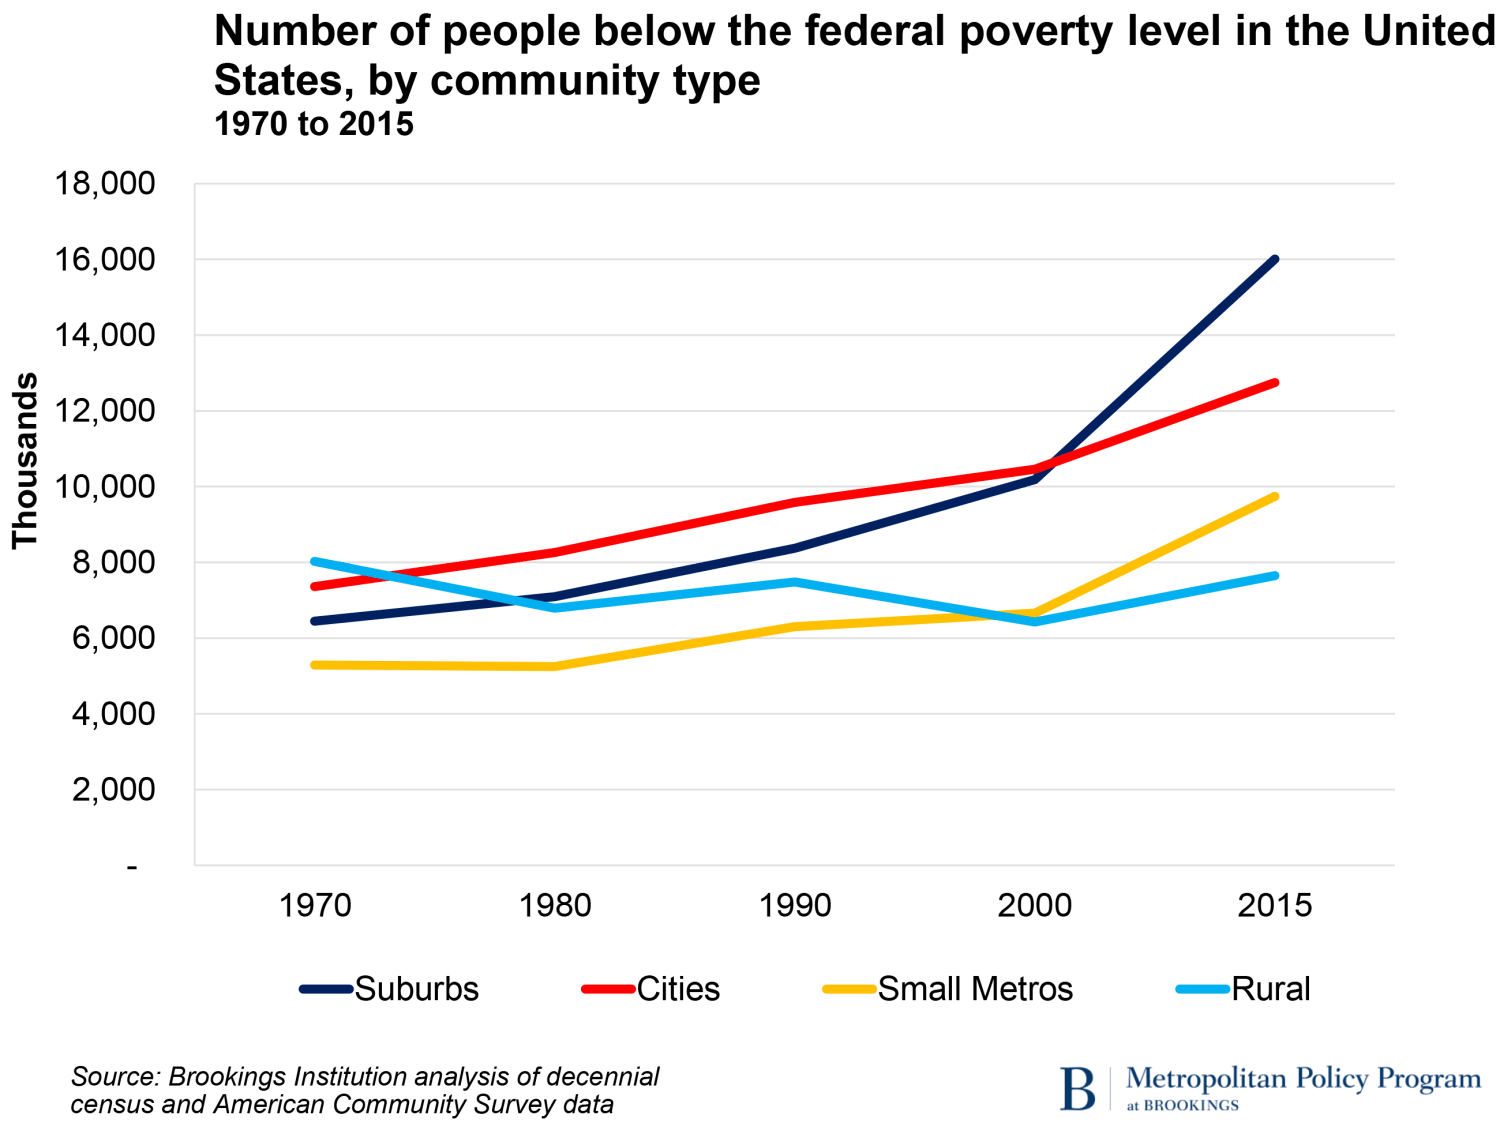 Number of people below the federal poverty level in the United States, by community type, 1970 to 2015